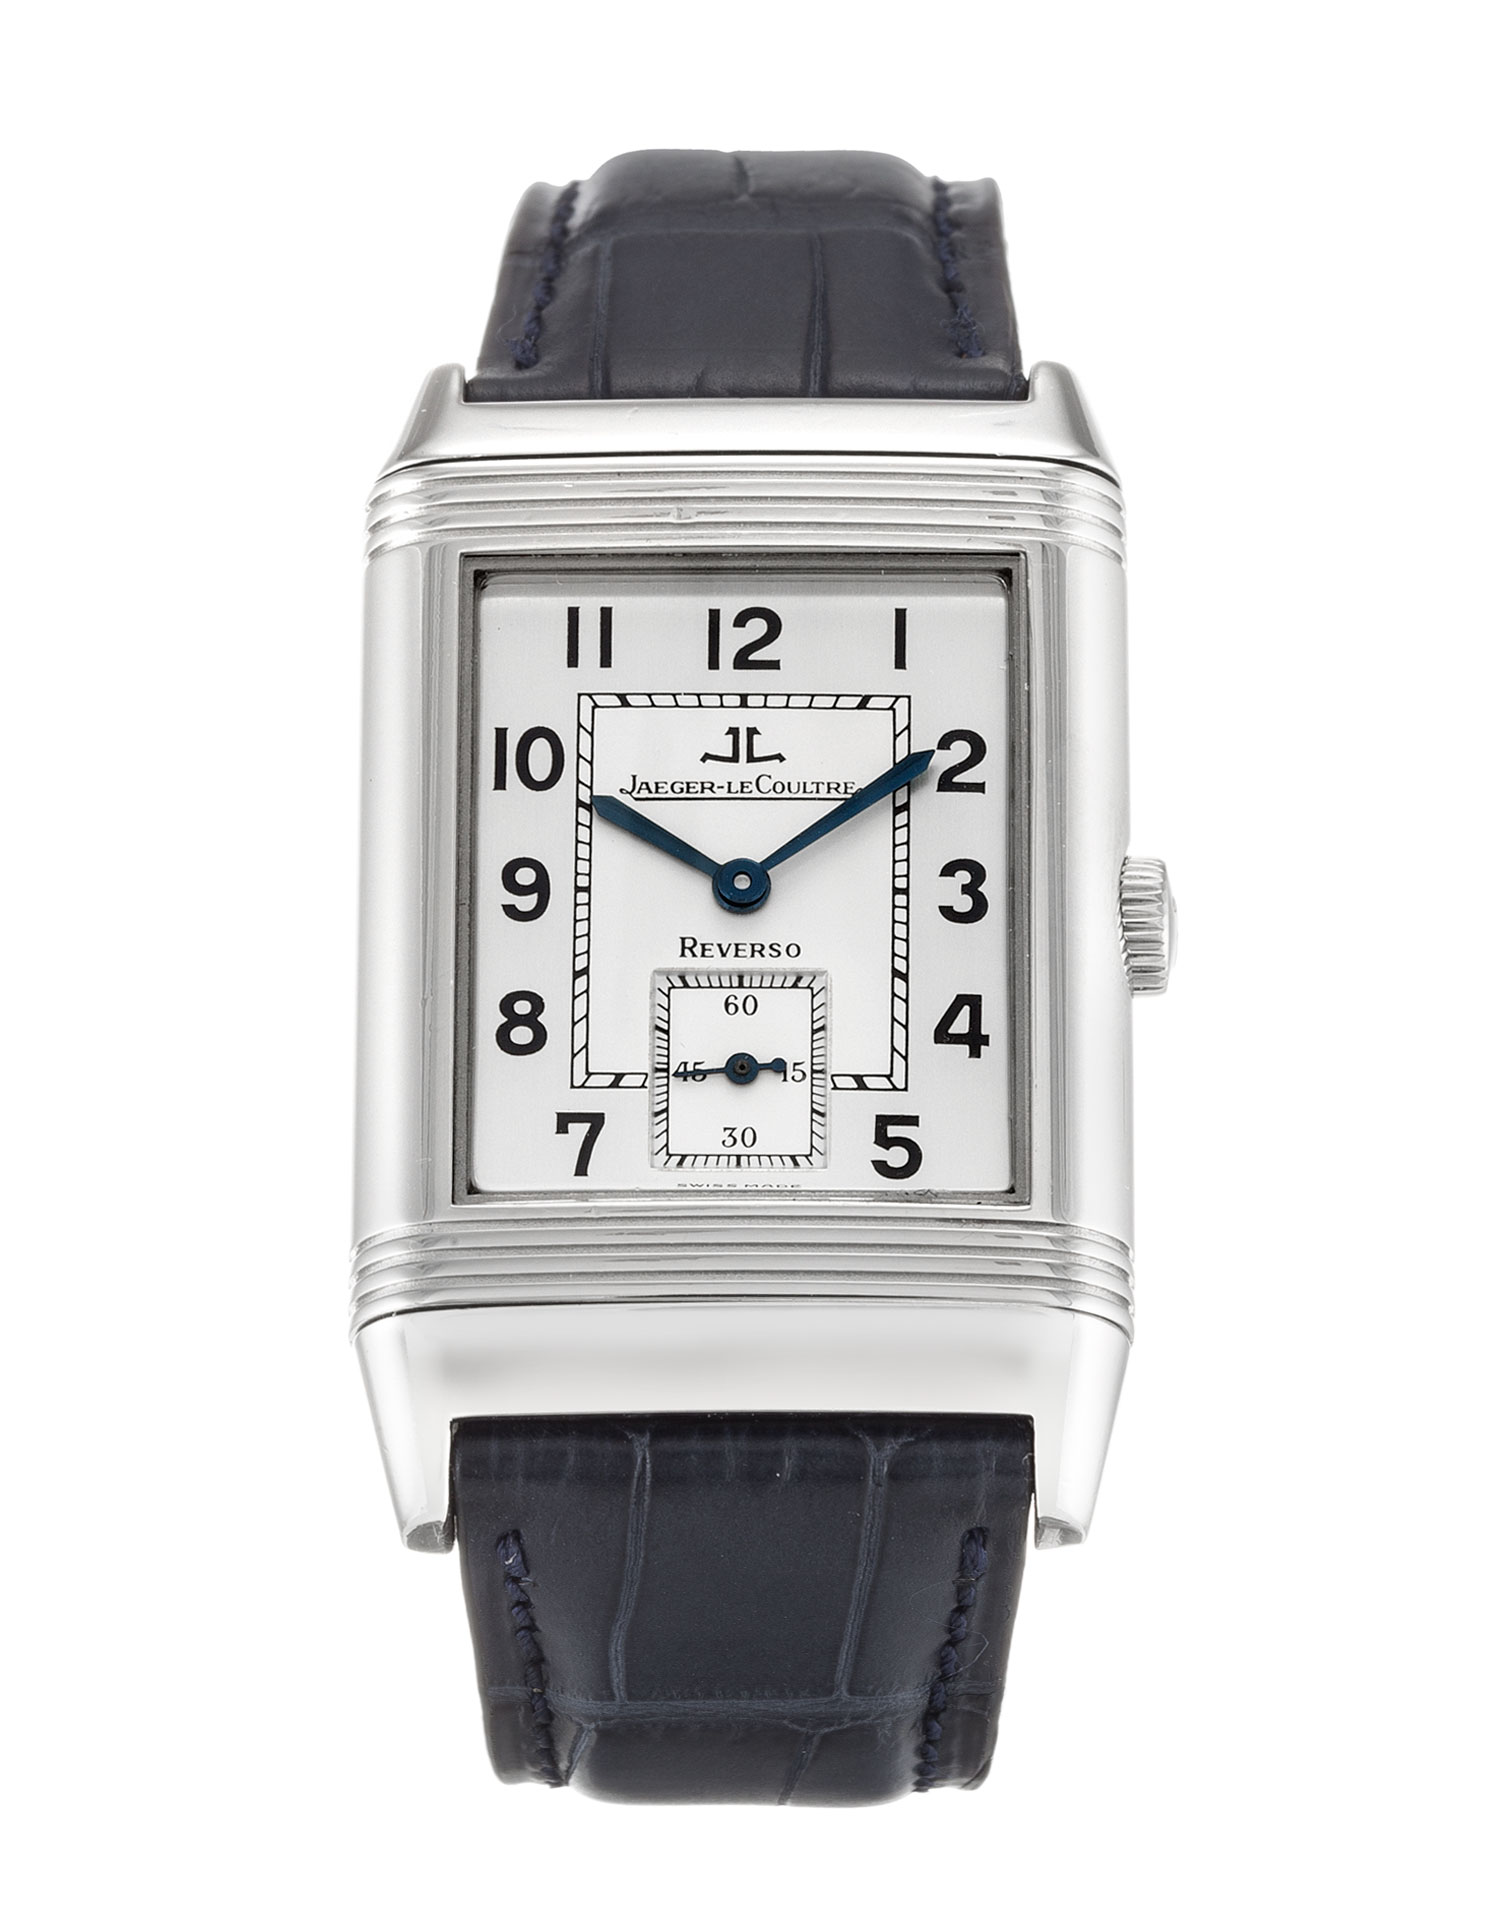 Reverso Grande Taille 26mm in Stainless Steel on Black Crocodile Leather Strap with Silver Dial